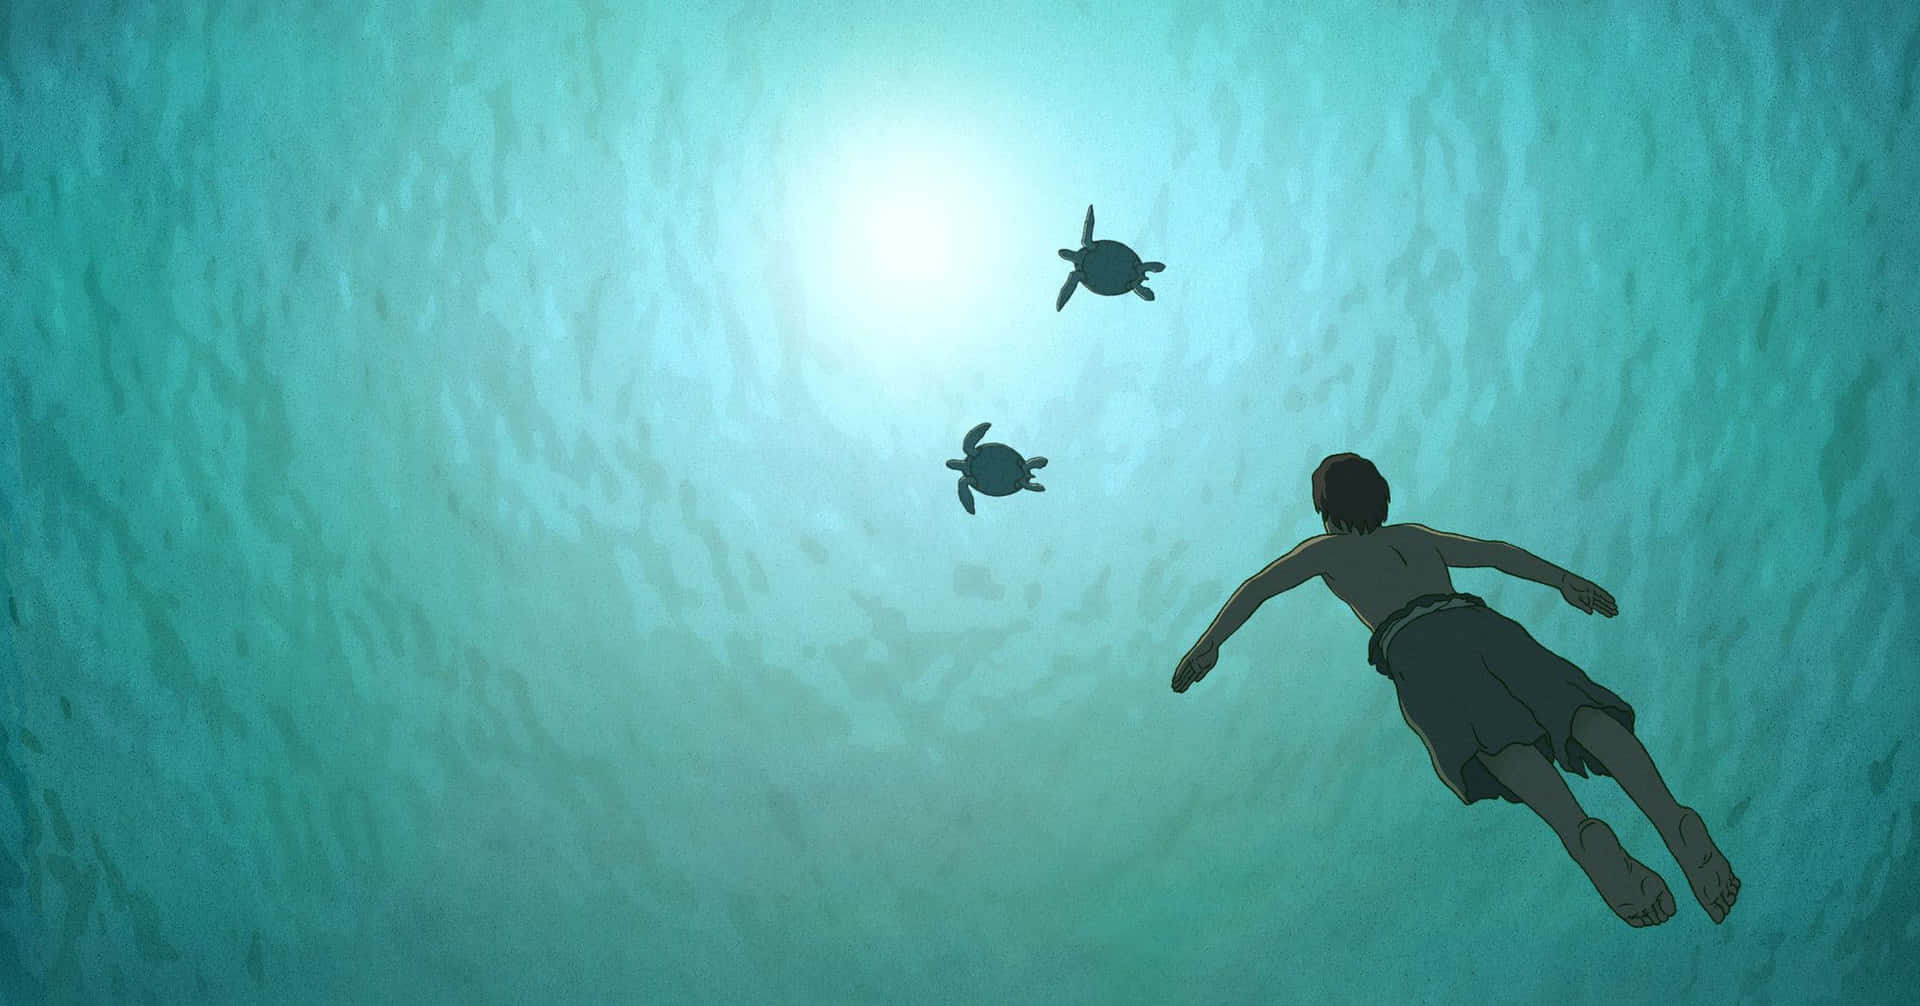 The Red Turtle, a magical encounter on a deserted island Wallpaper